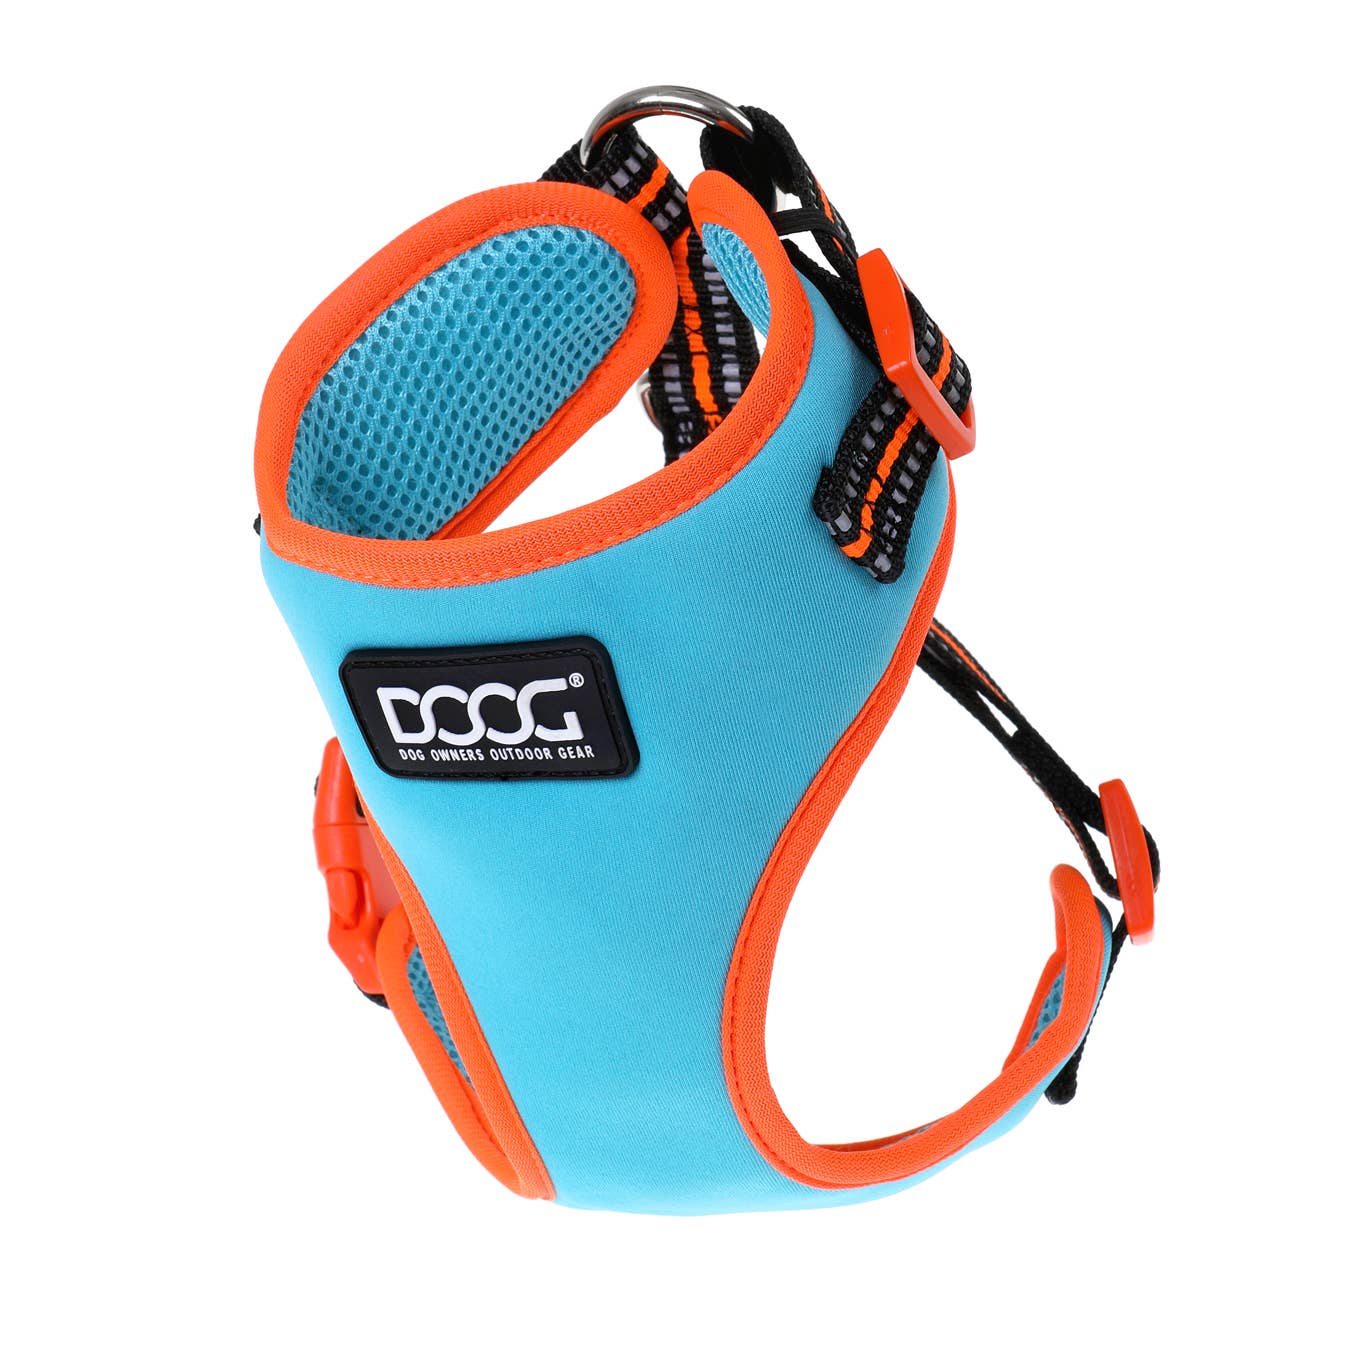 'Neoflex' Soft Harness - BEETHOVEN (Neon)